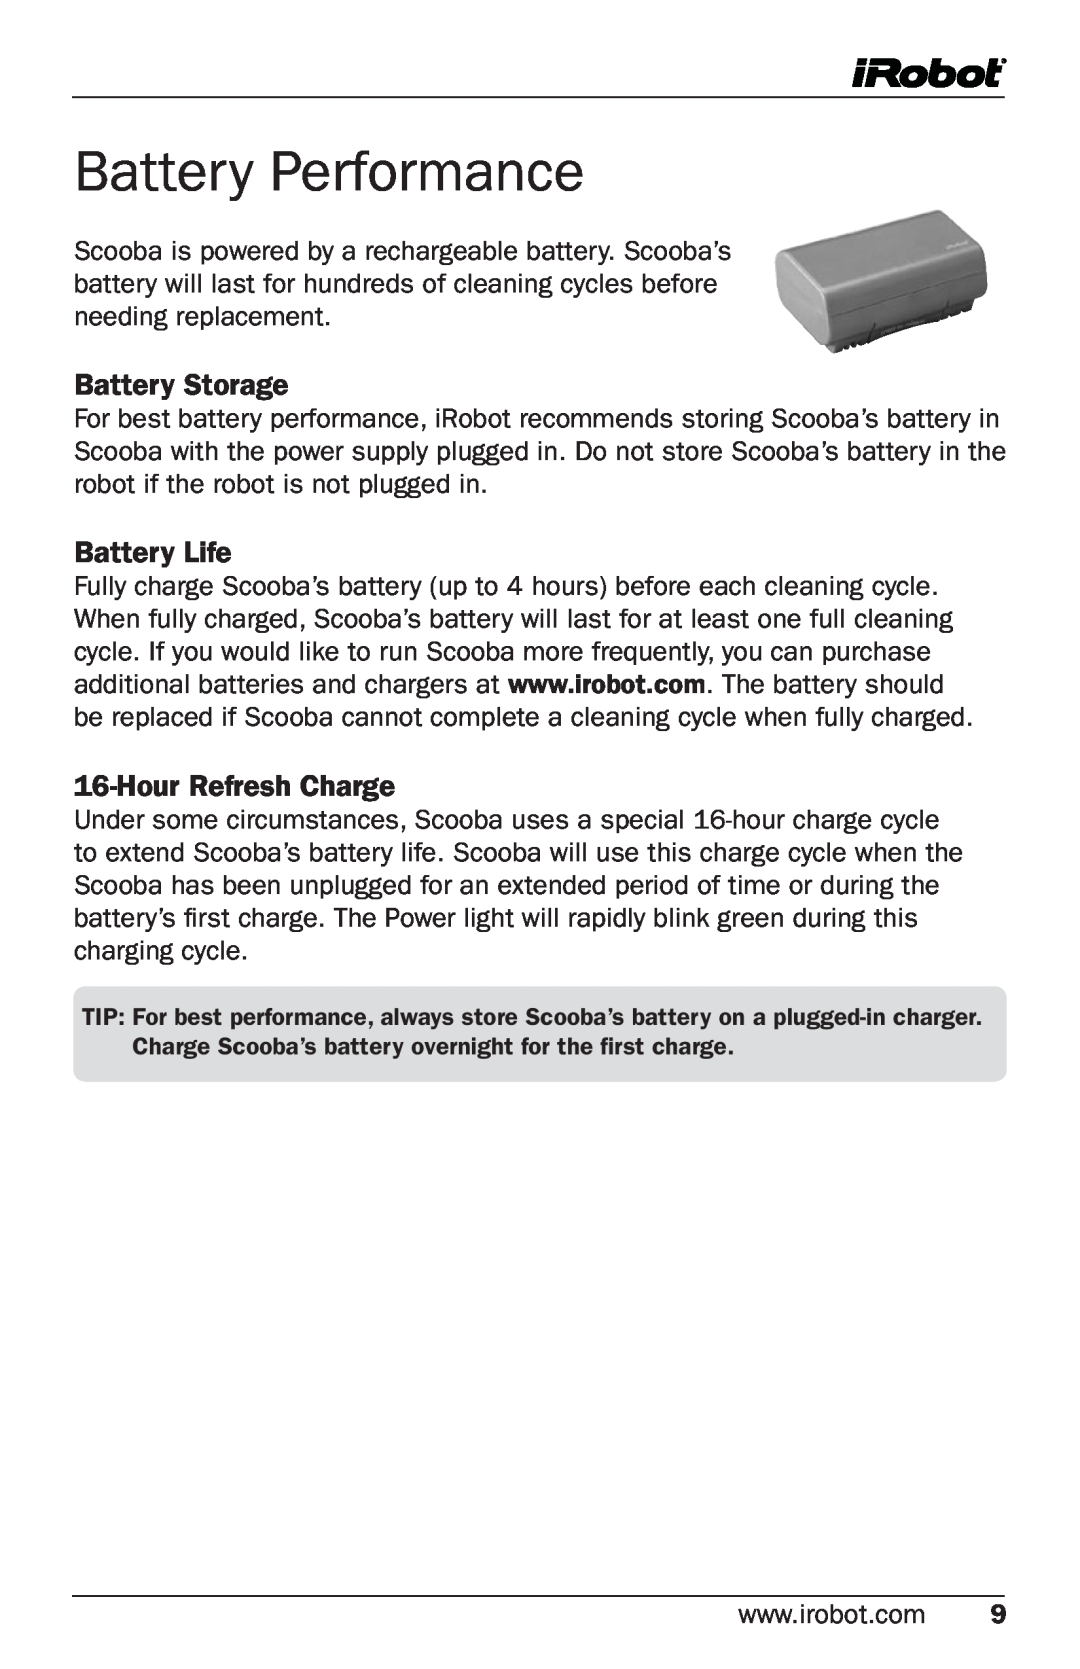 iRobot Cleaning System owner manual Battery Performance, Battery Storage, Battery Life, HourRefresh Charge 